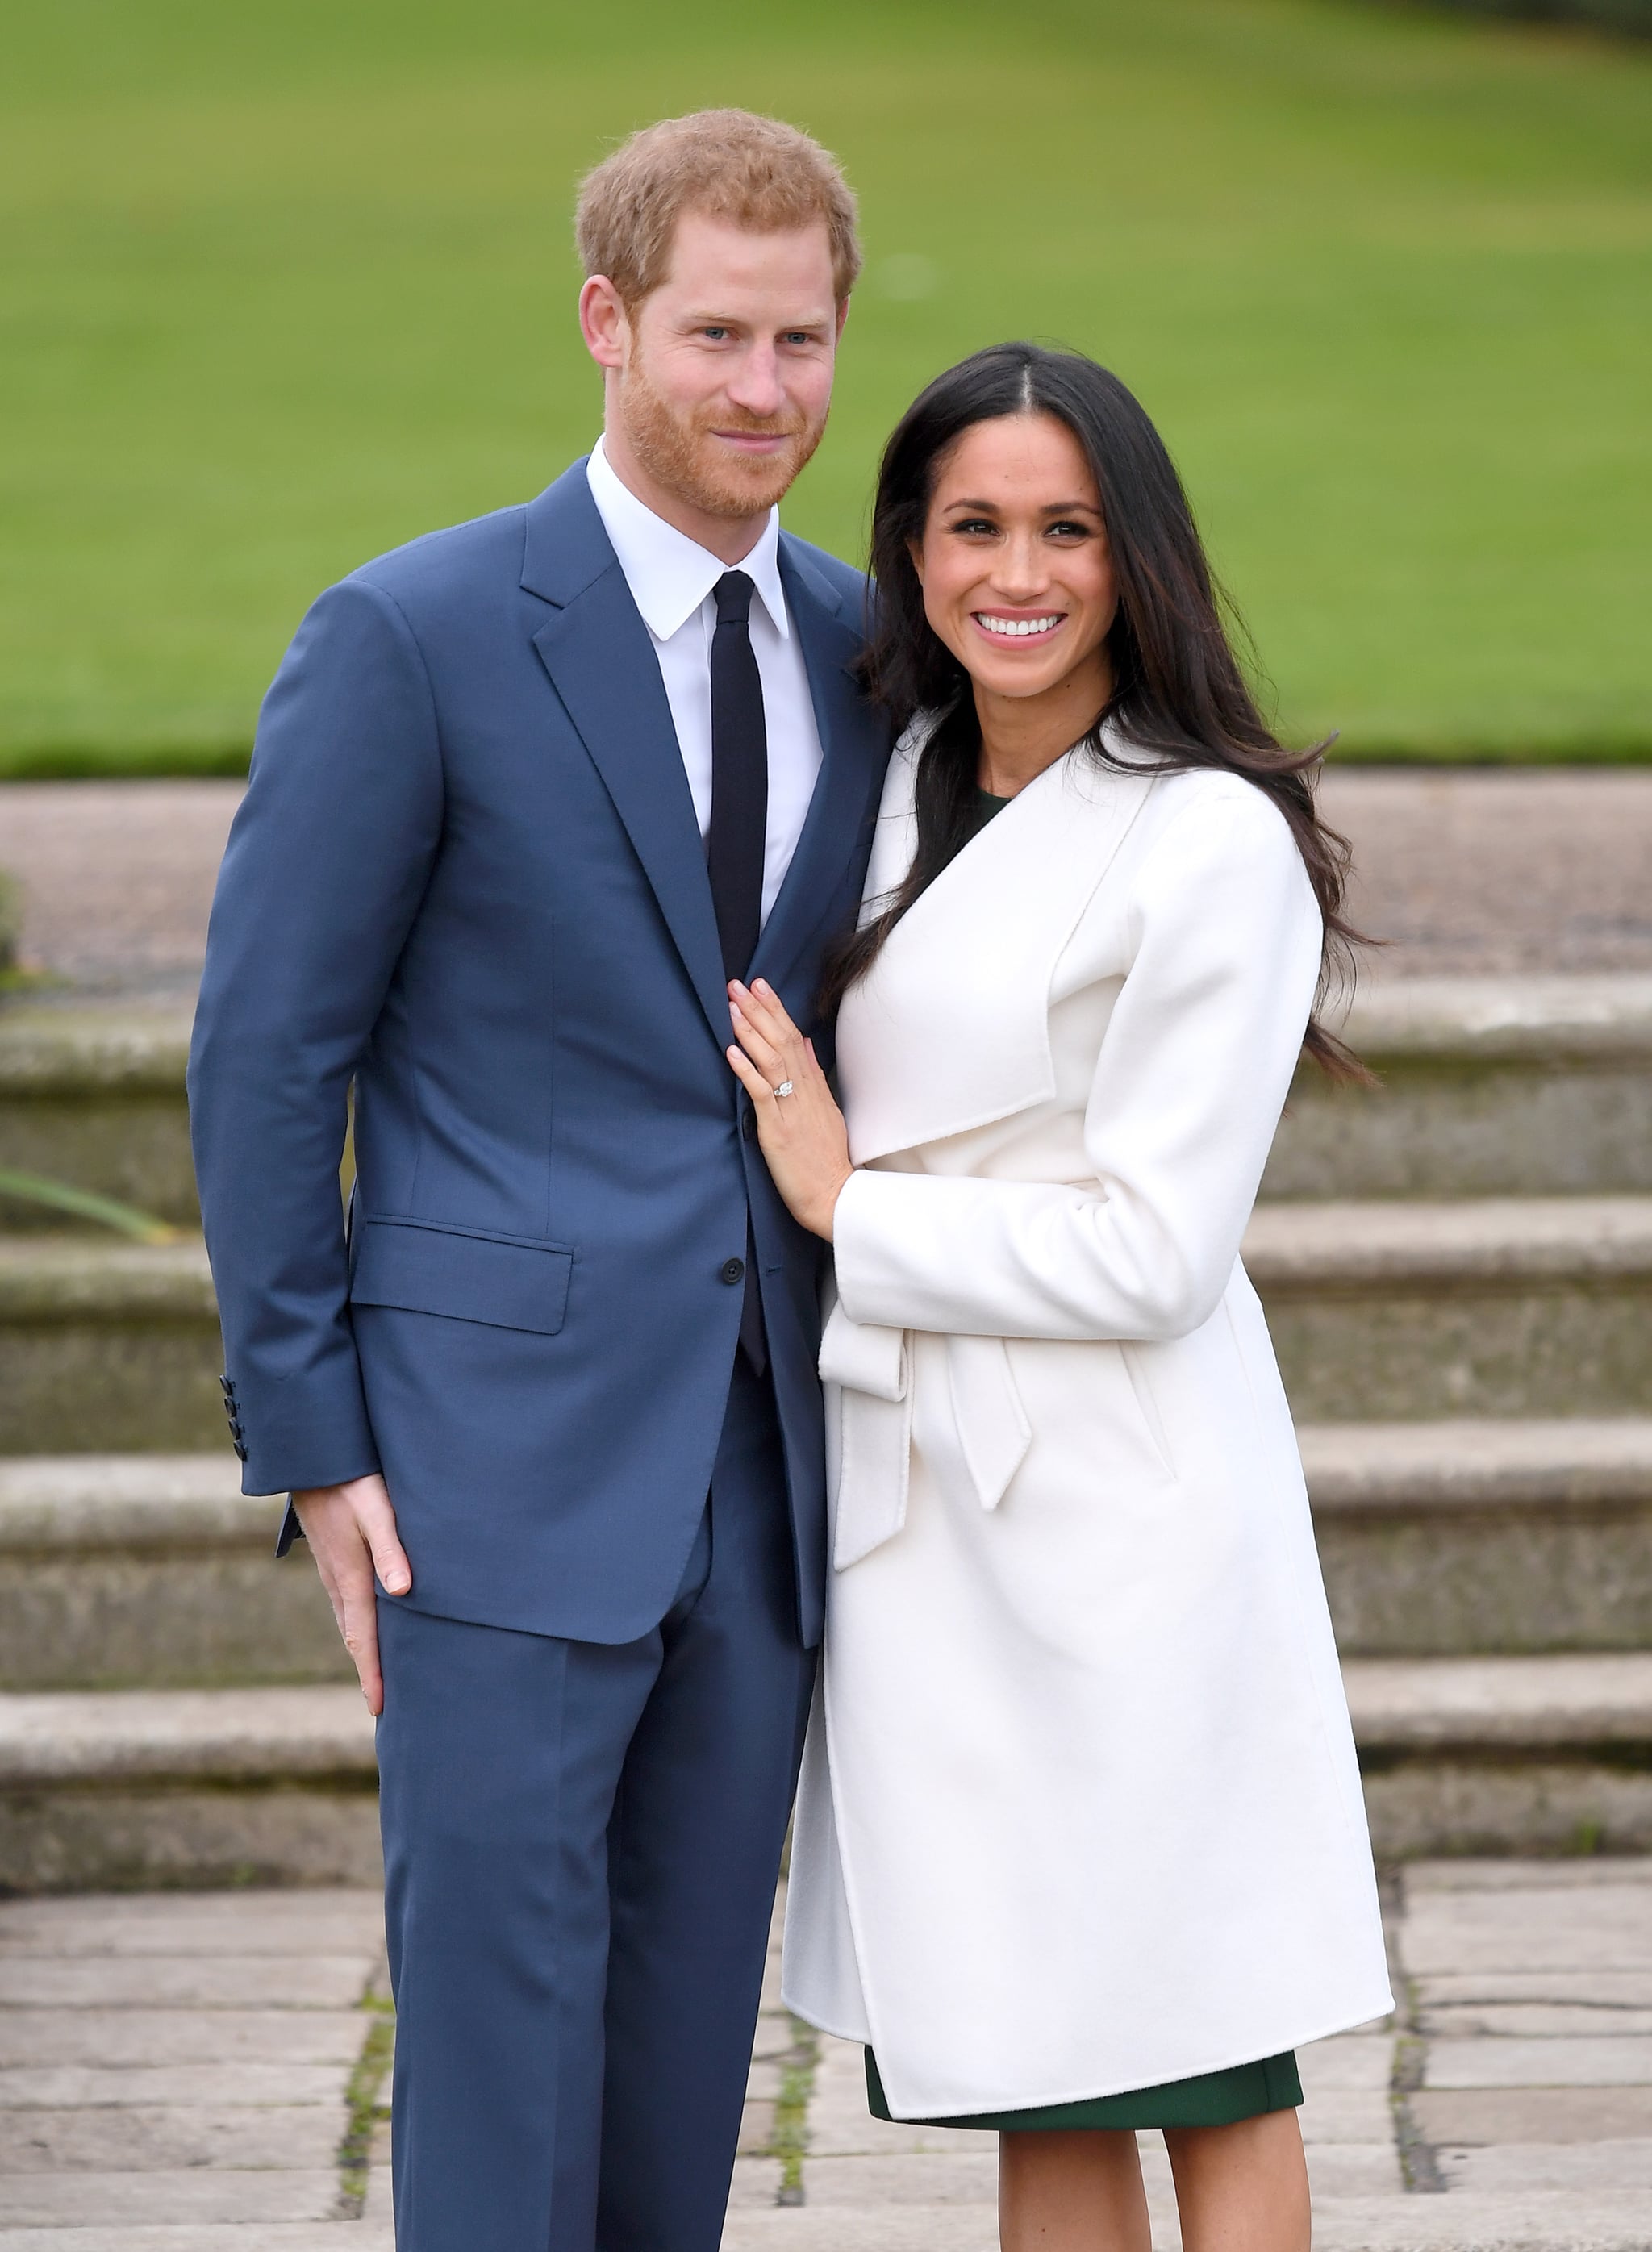 LONDON, ENGLAND - NOVEMBER 27:  Prince Harry and Meghan Markle attend an official photocall to announce their engagement at The Sunken Gardens at Kensington Palace on November 27, 2017 in London, England.  Prince Harry and Meghan Markle have been a couple officially since November 2016 and are due to marry in Spring 2018.  (Photo by Karwai Tang/WireImage)